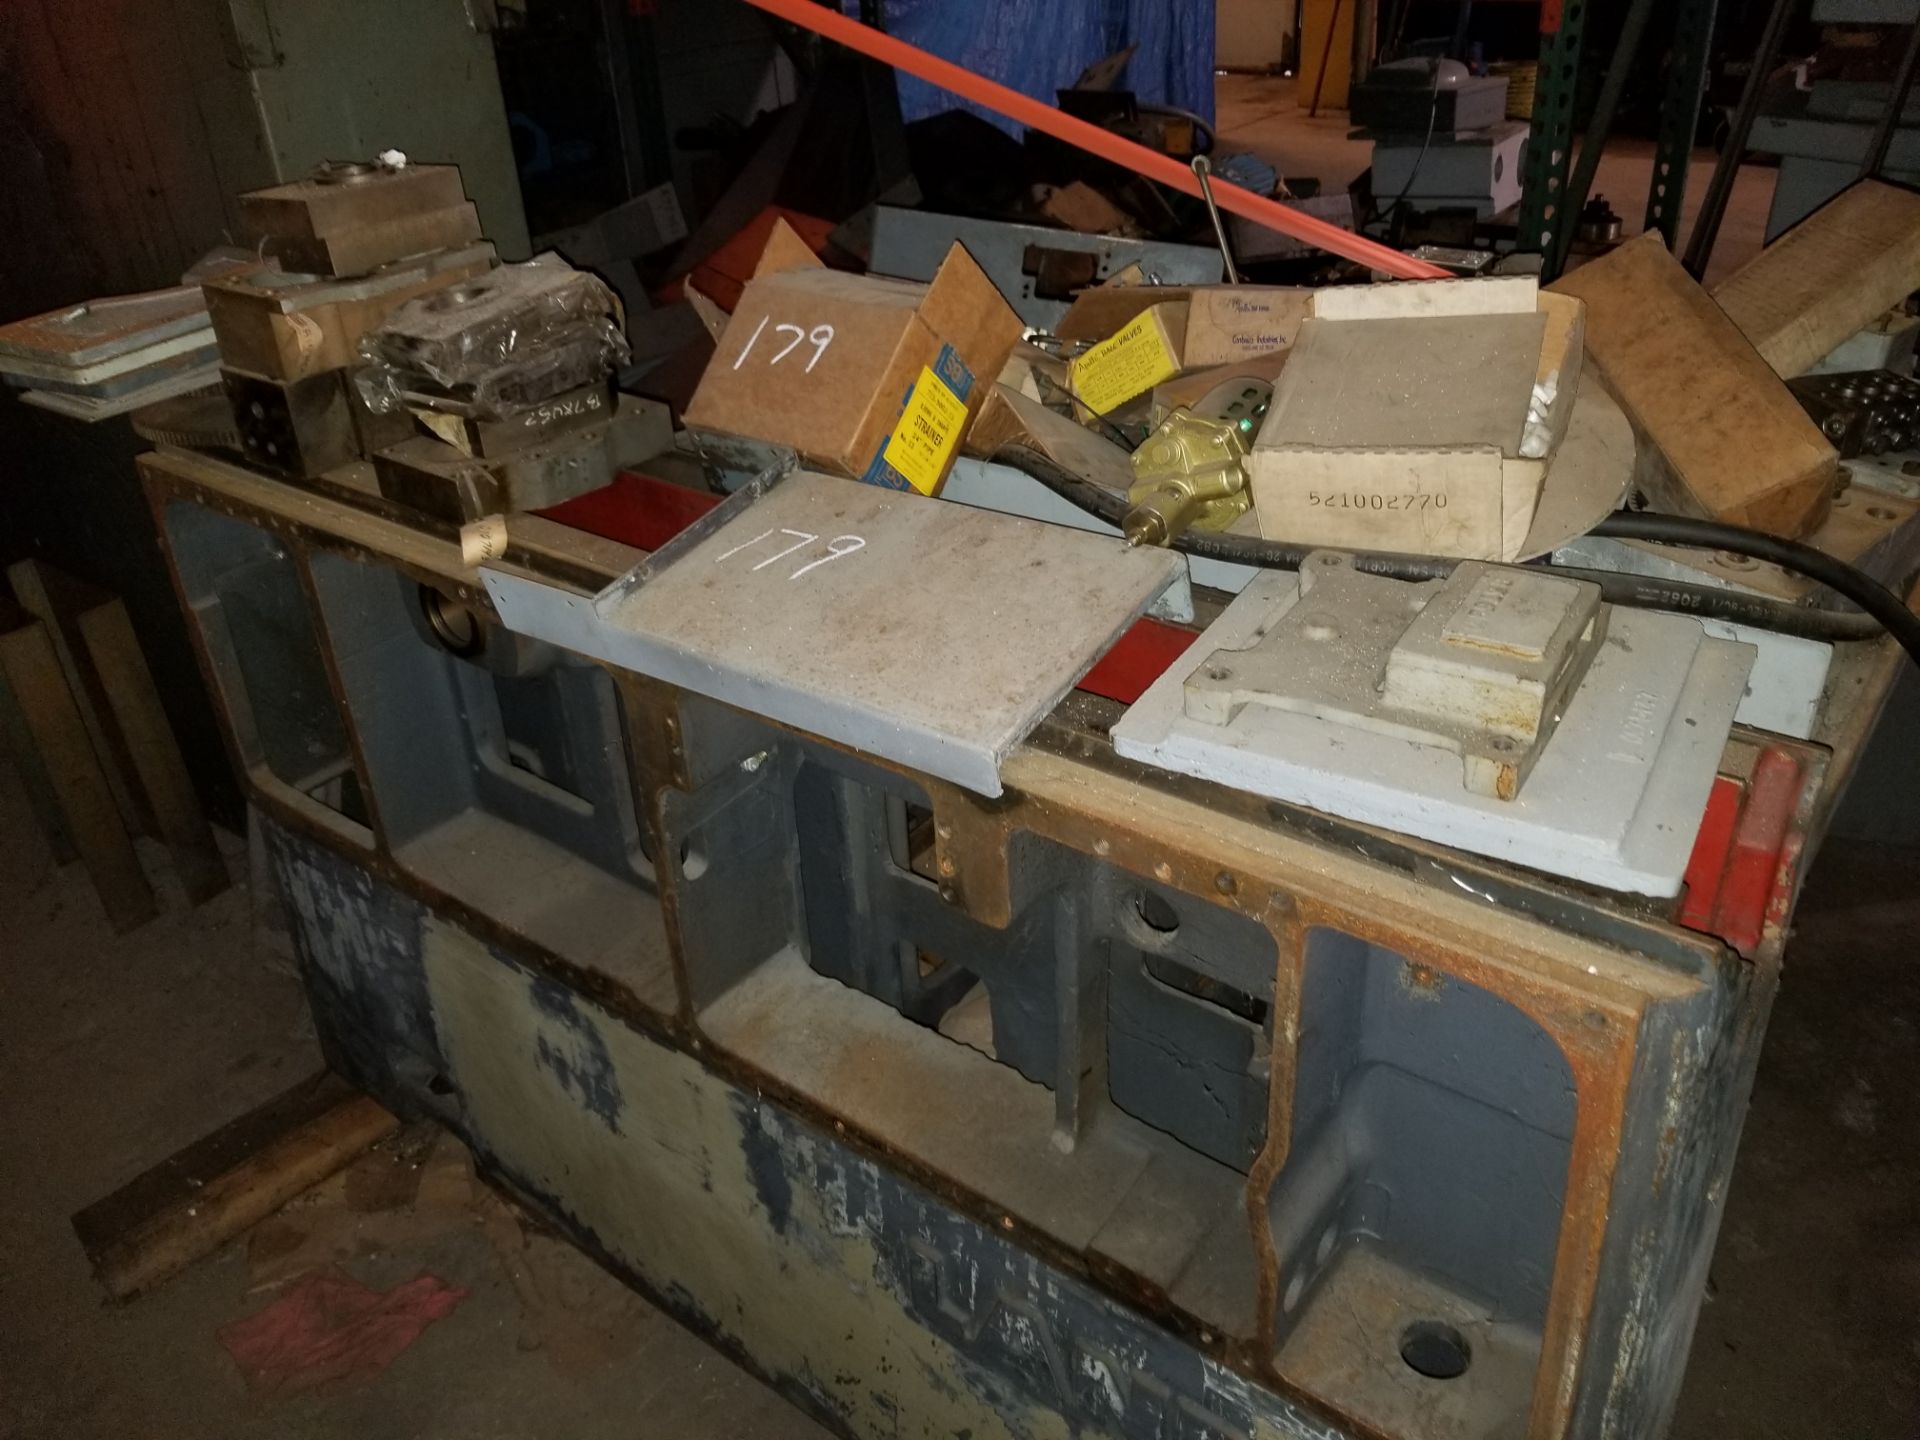 Industrial Press, Grinding Machines, Radial Arm Saw, Hydraulic Tank and More